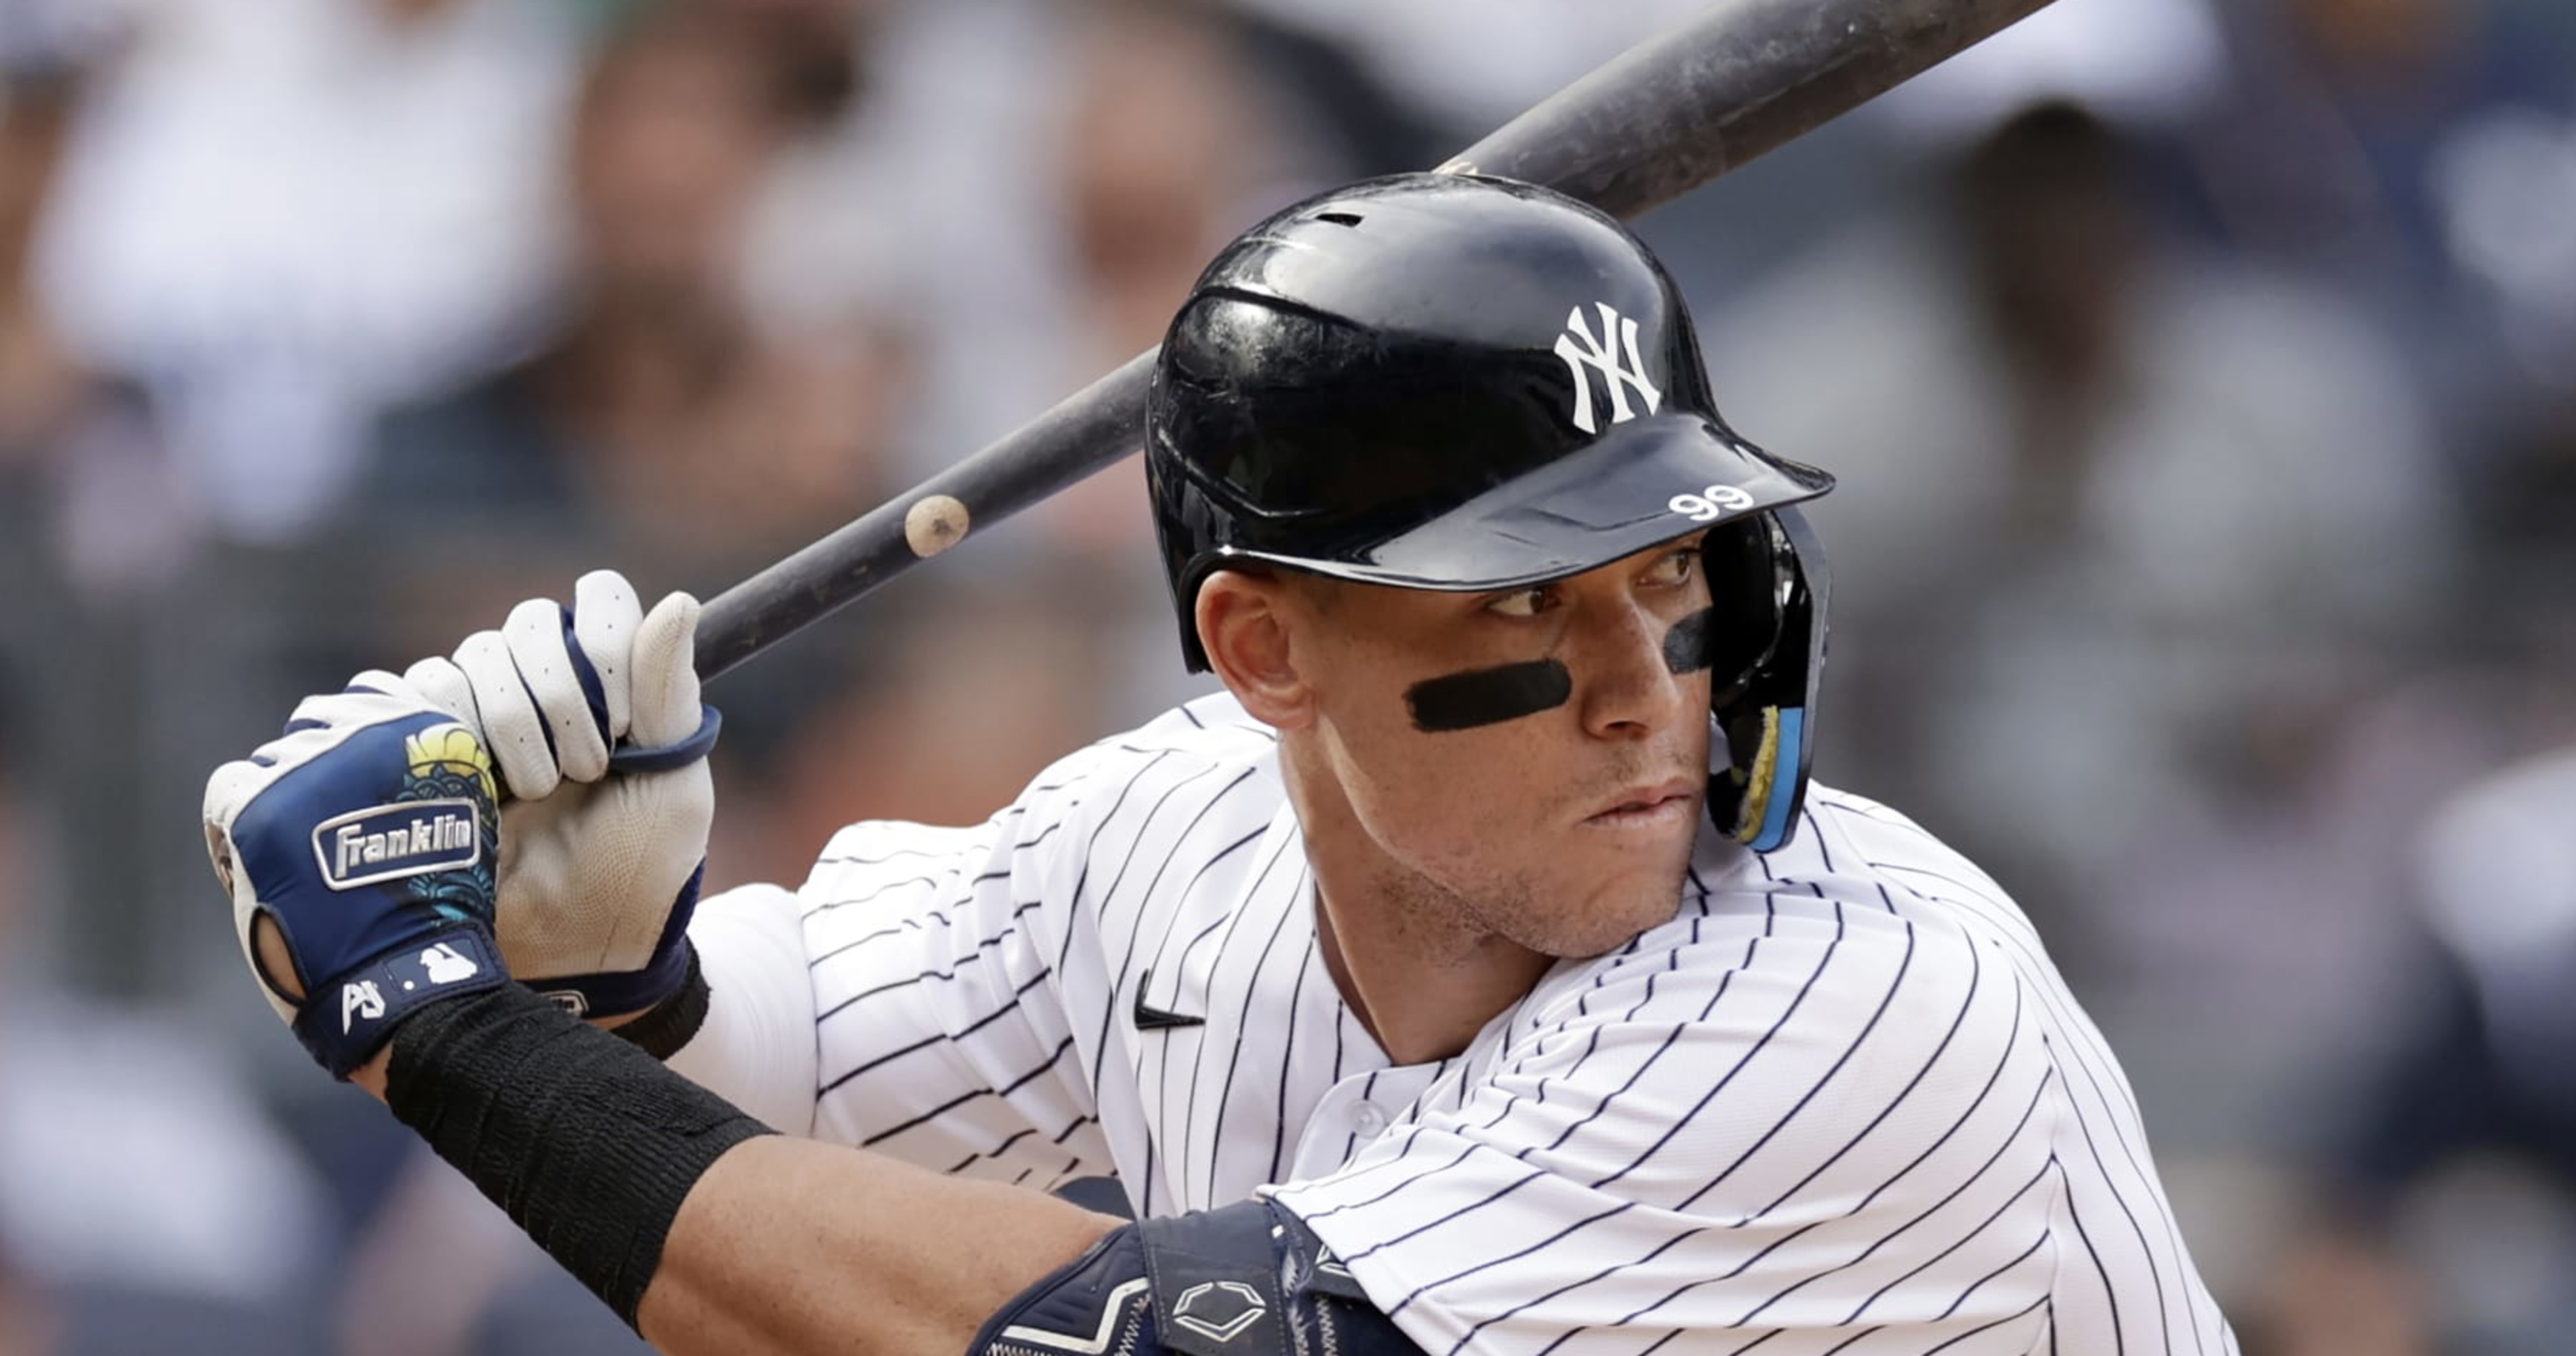 Aaron Judge is a great slugger — but is Gary Sanchez on his level